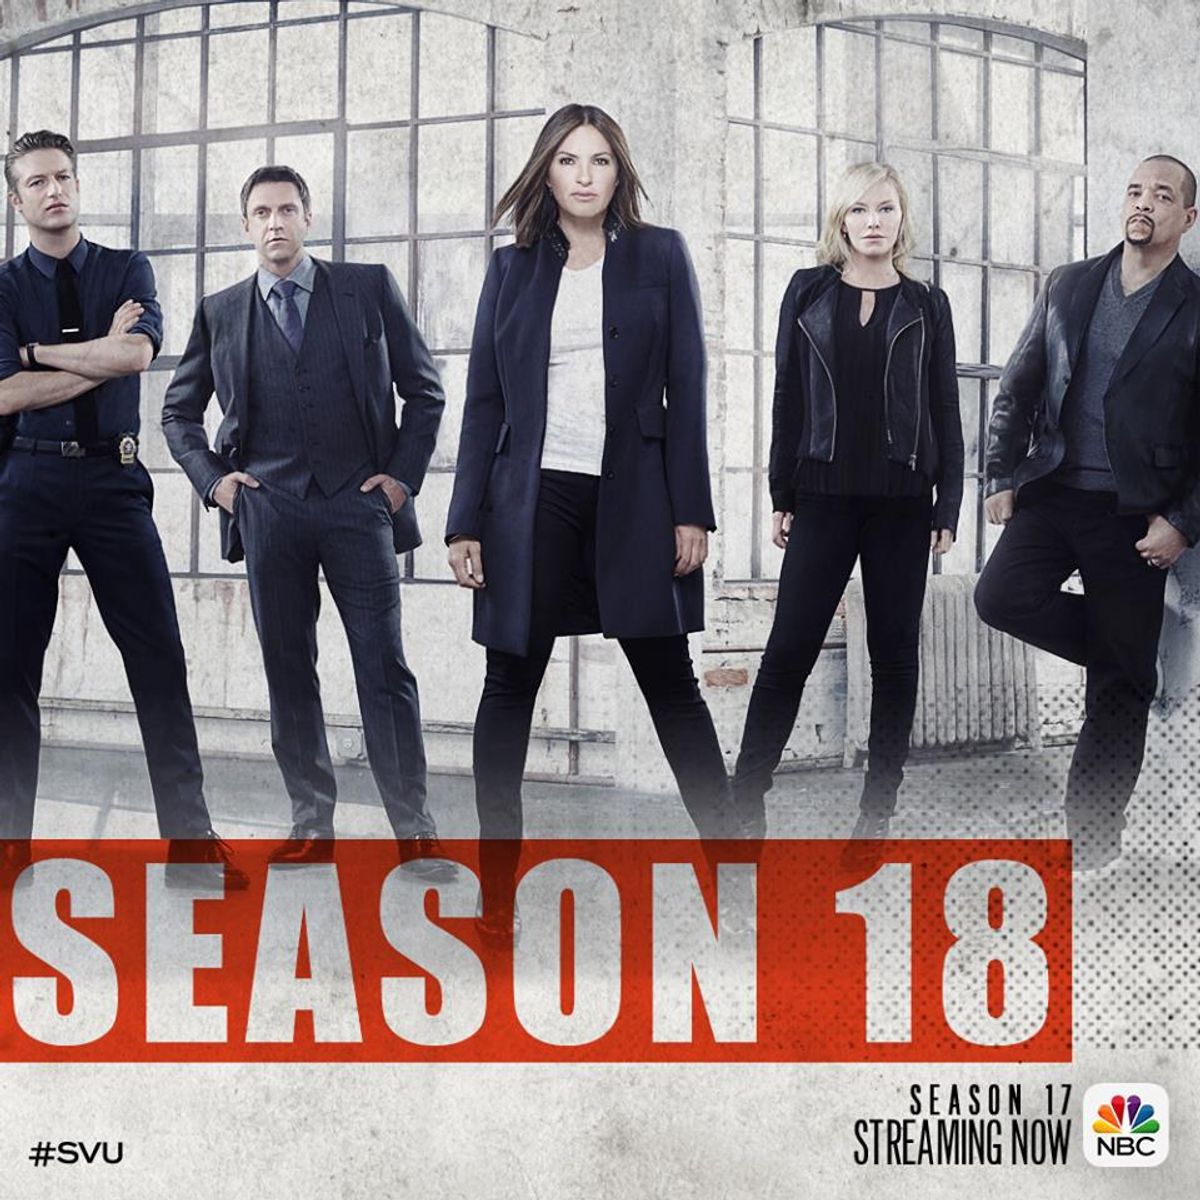 Thoughts On The First Episode Of 'Law & Order: SVU Season 18'